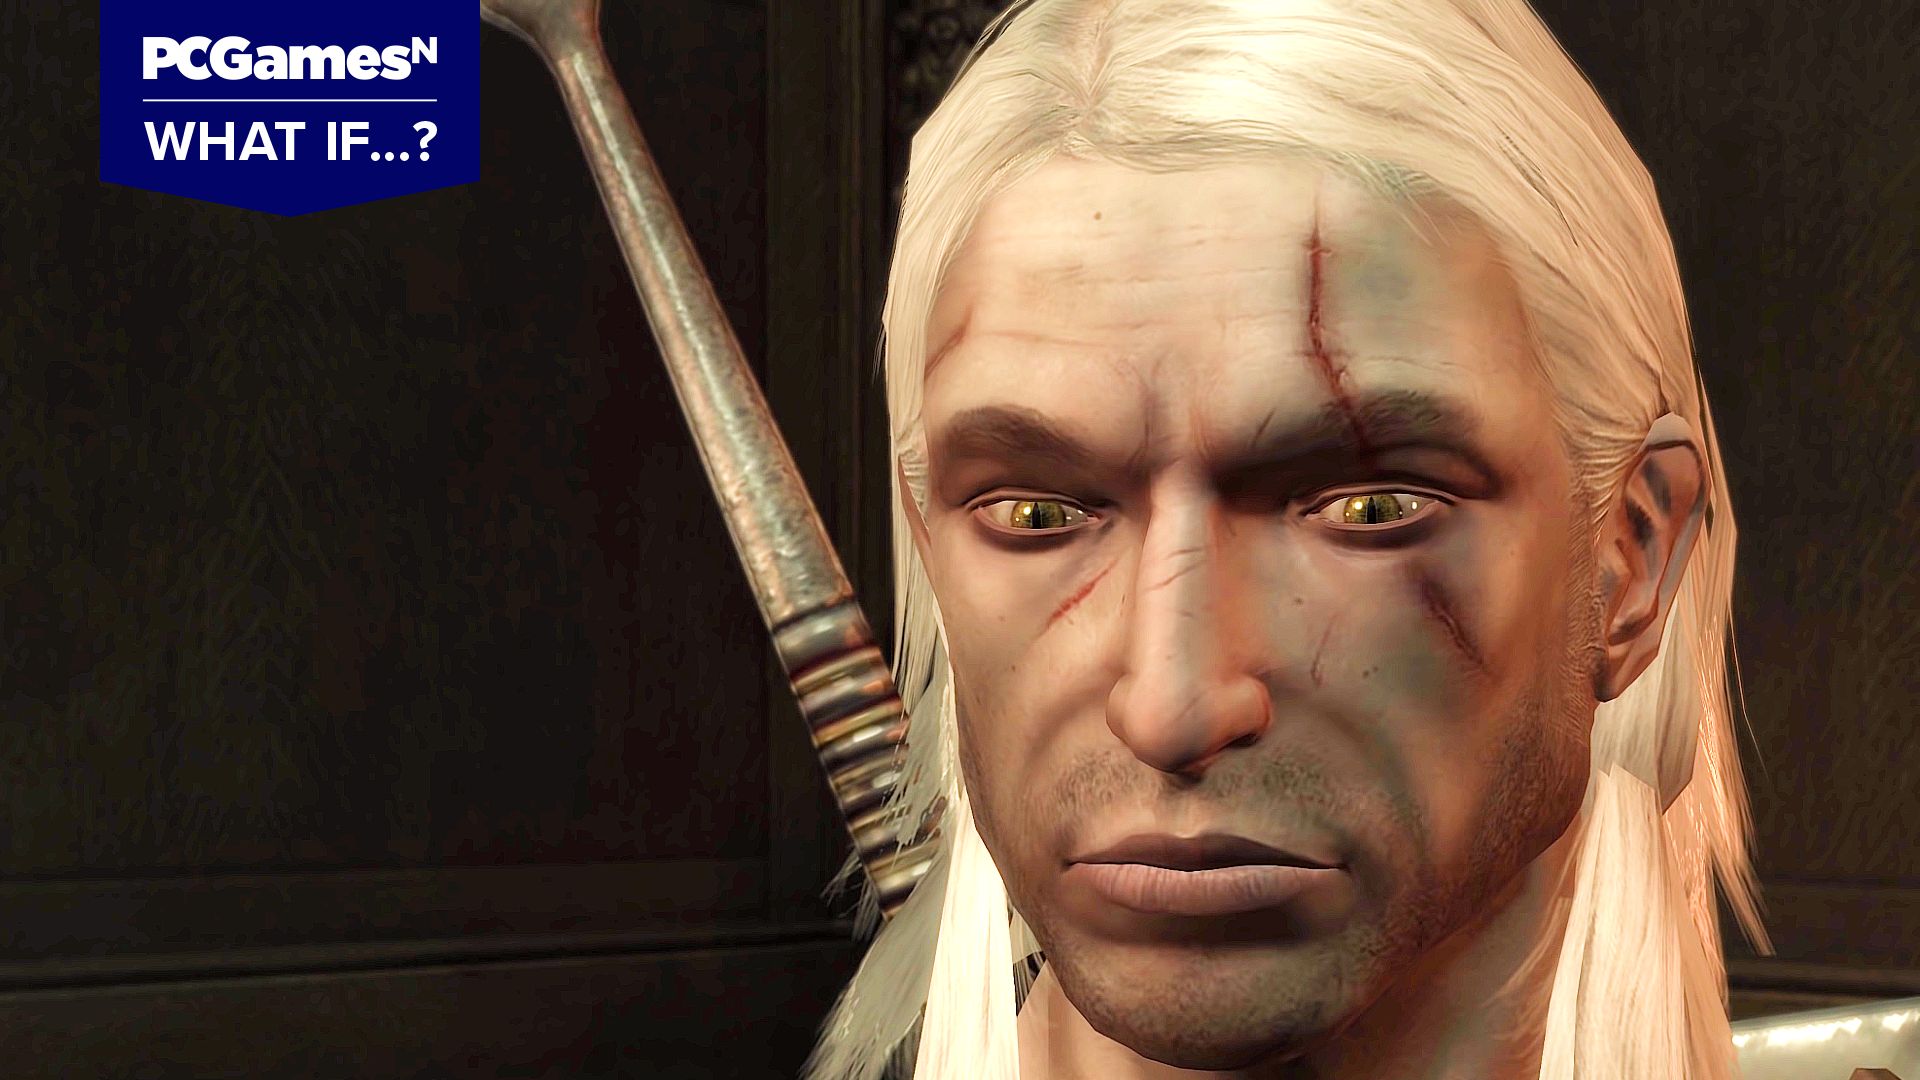 The Witcher 3 May Get Dethroned By The Witcher 1 Remake